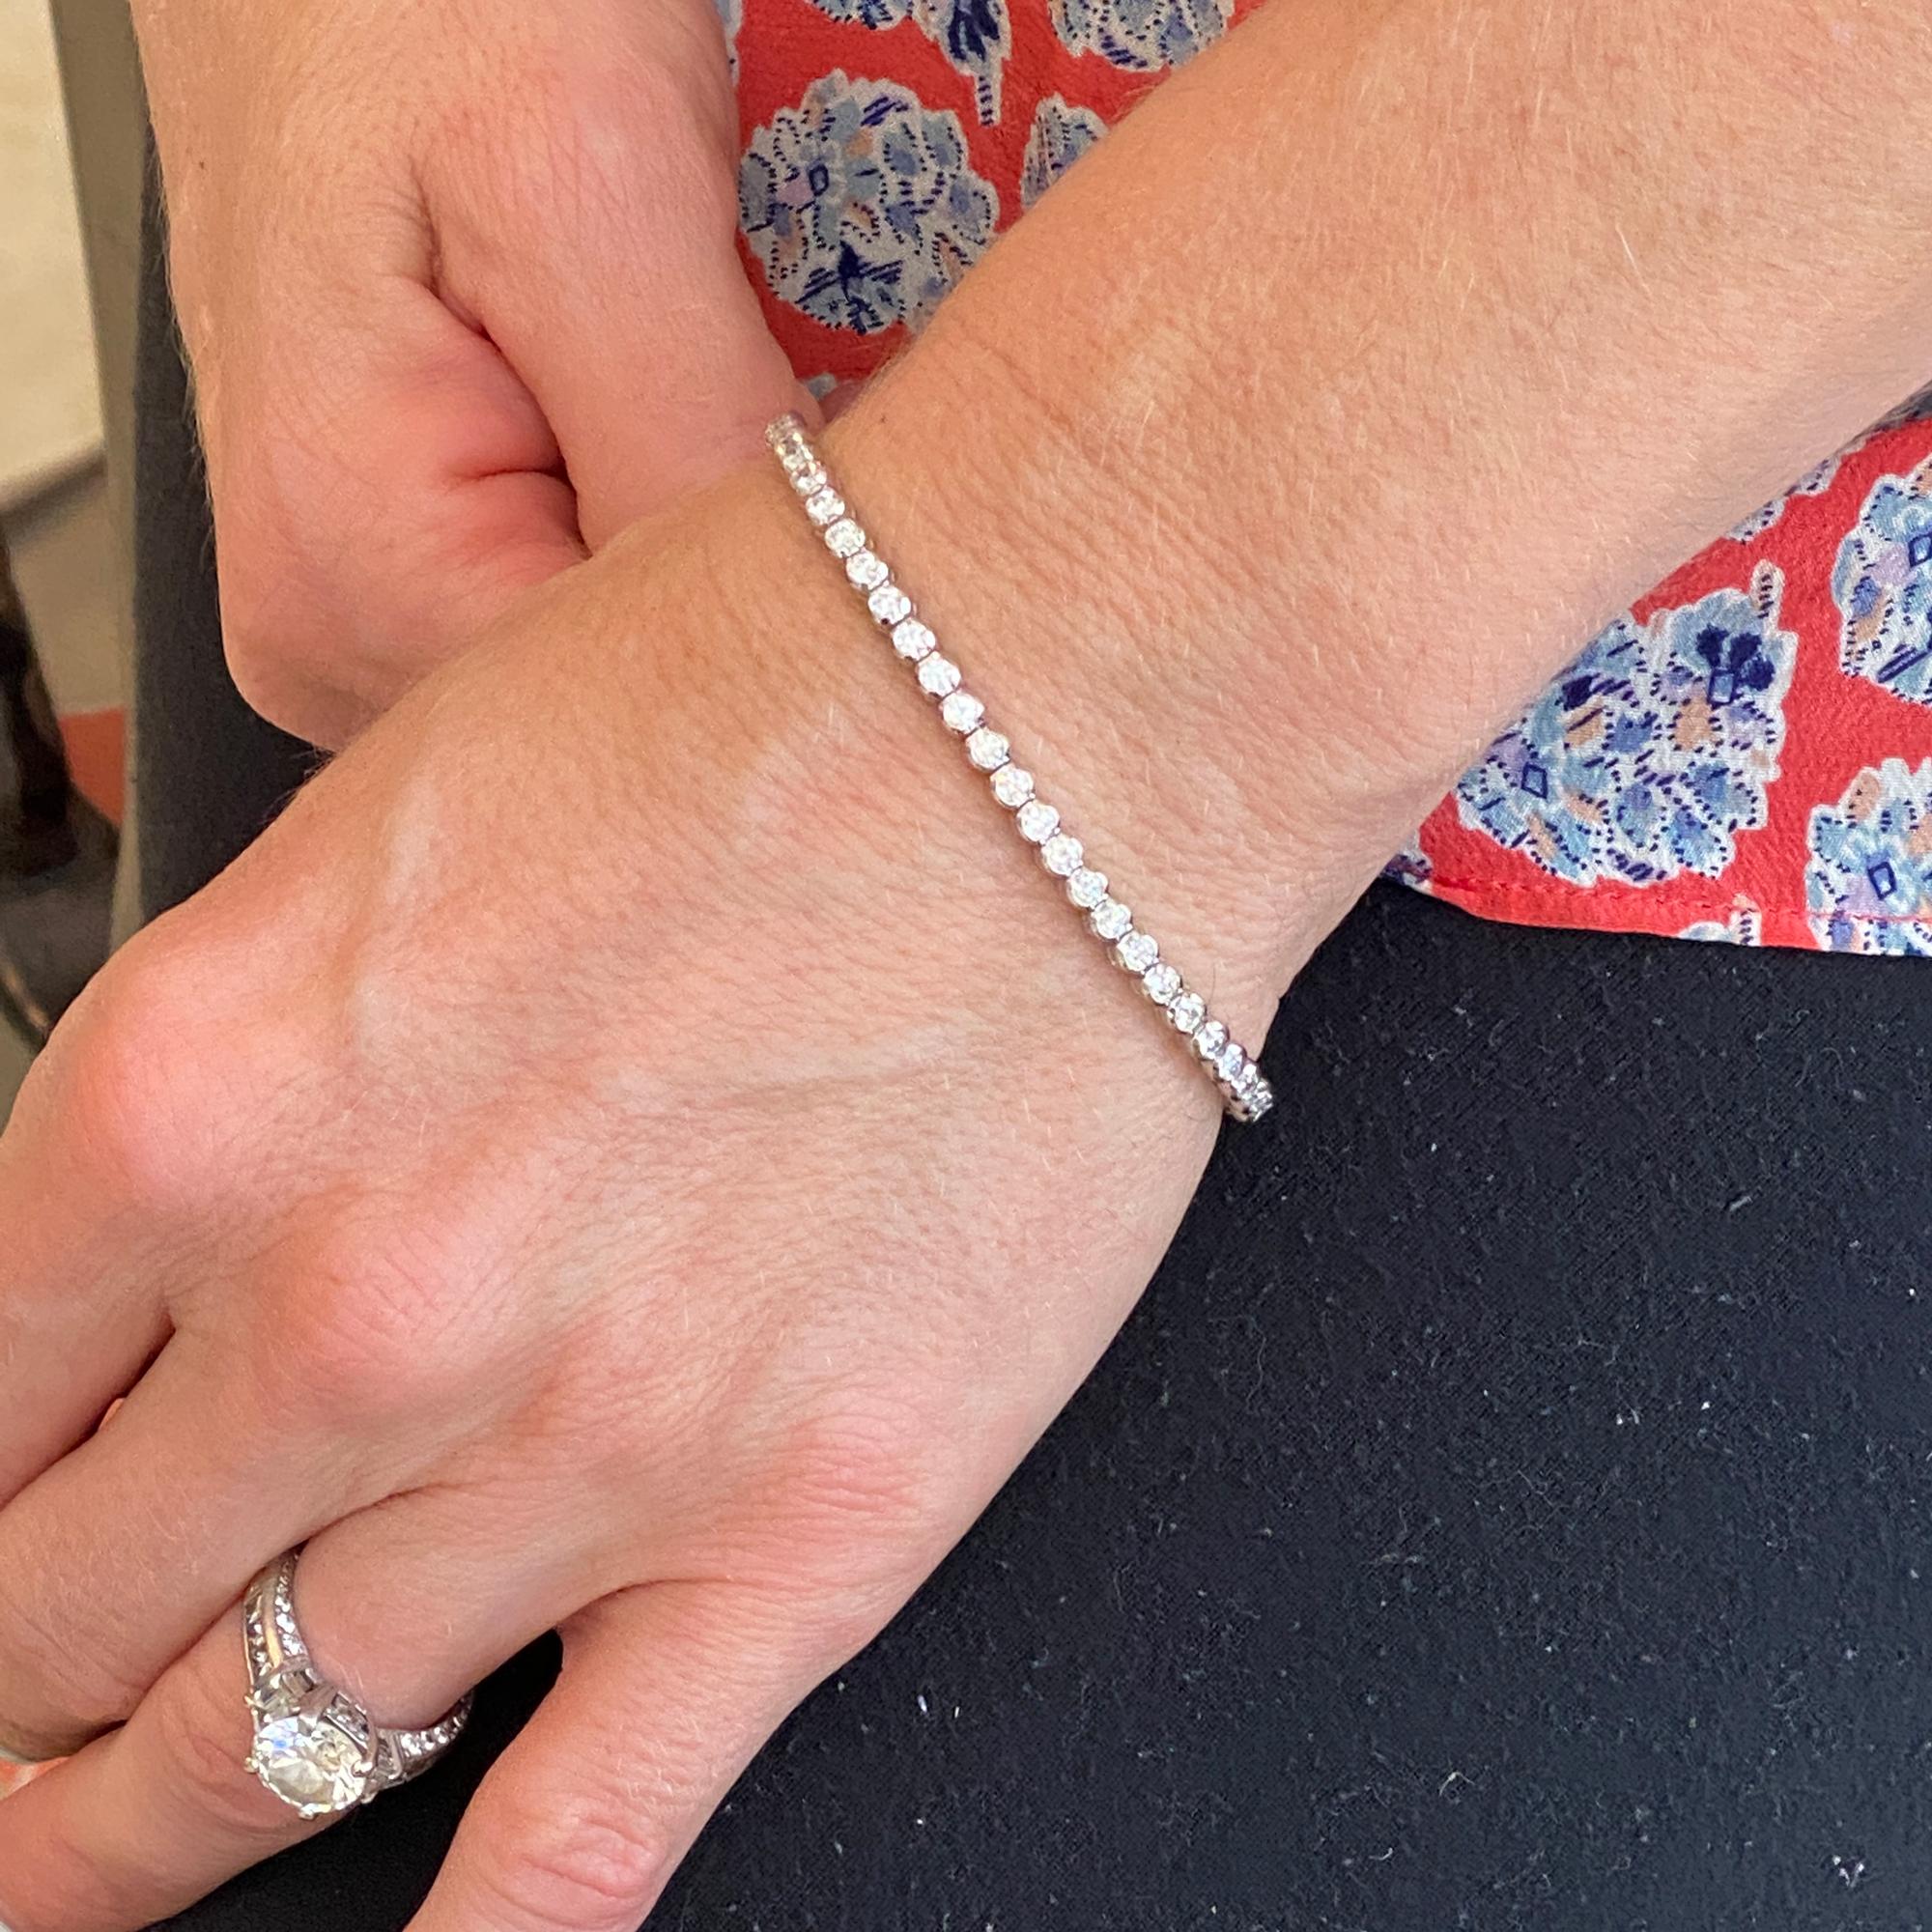 Diamond bezel set tennis bracelet fashioned in 14 karat white gold. The bracelet features 63 round brilliant cut diamonds weighing 3.42 carat total weight. The bezel set diamonds are graded G-H color and VS clarity. The bracelet measures 7.5 inches